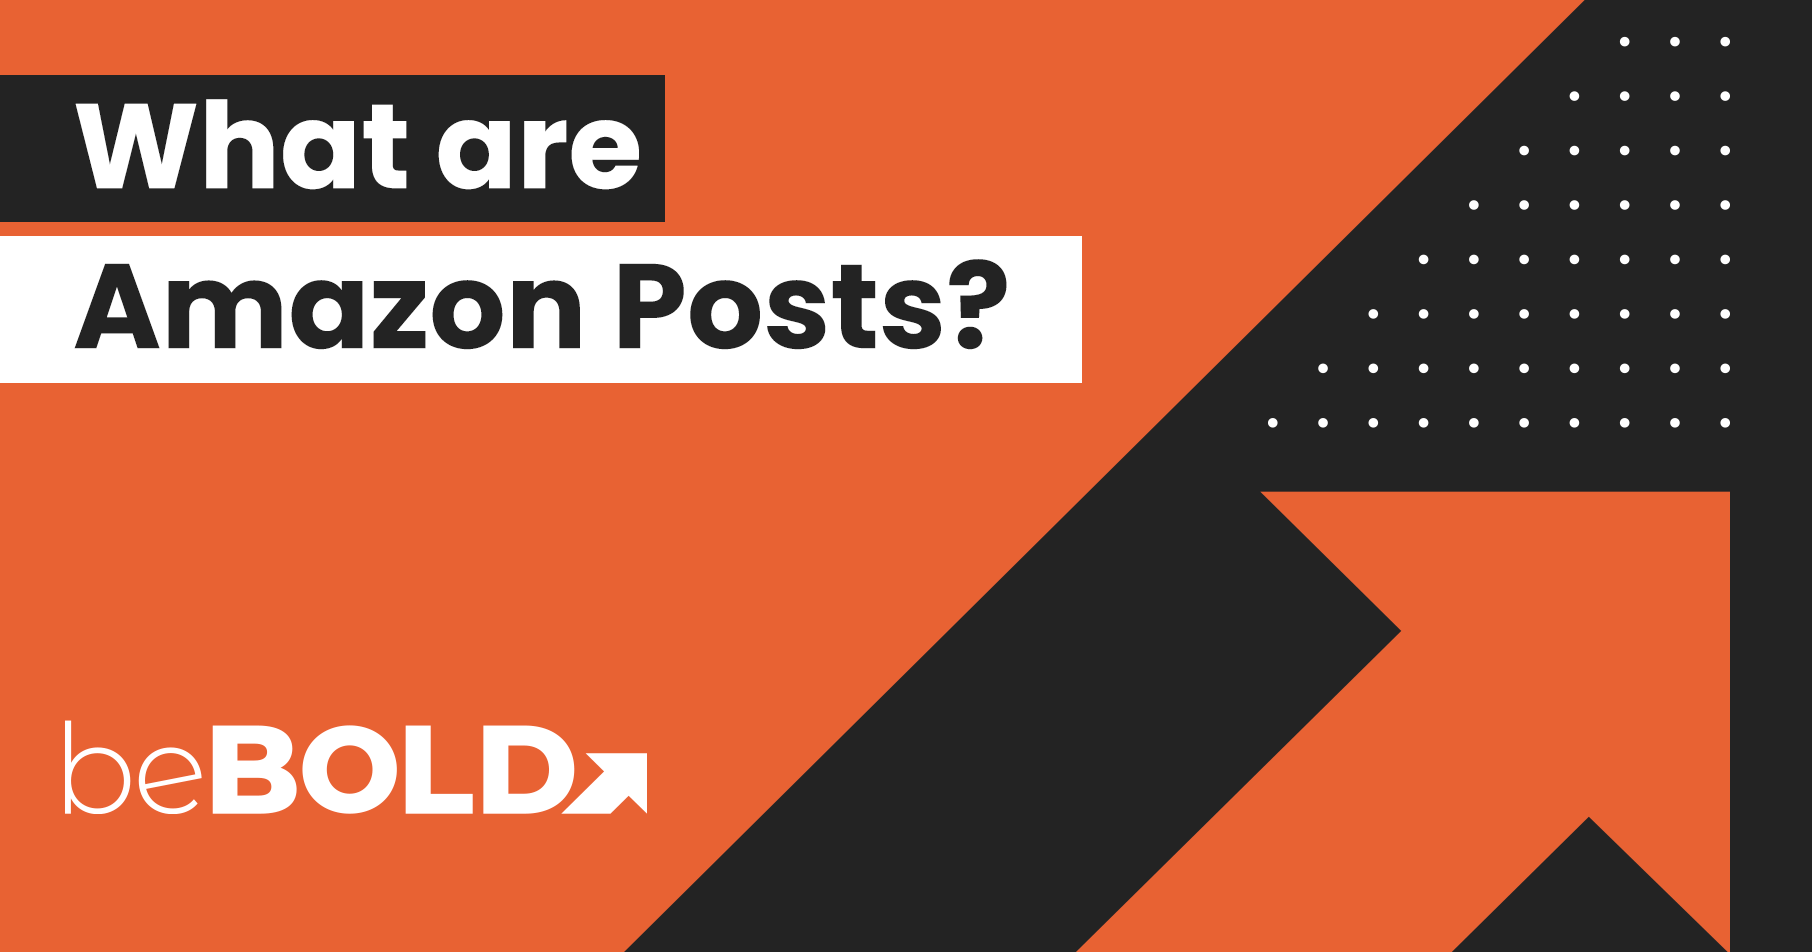 what are Amazon Posts?